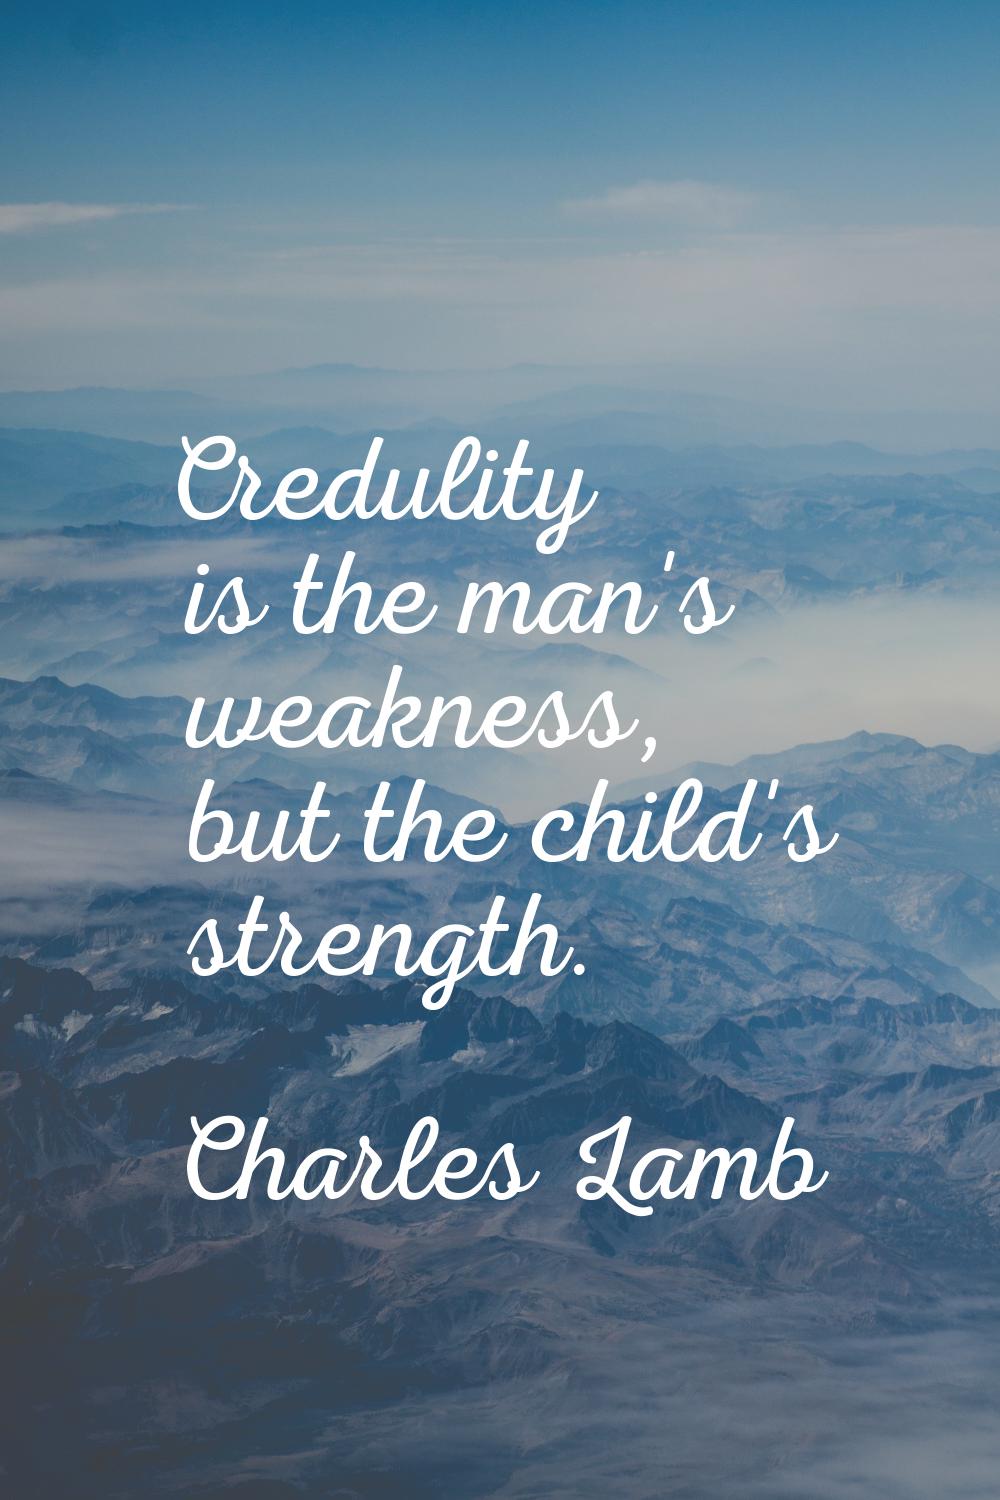 Credulity is the man's weakness, but the child's strength.